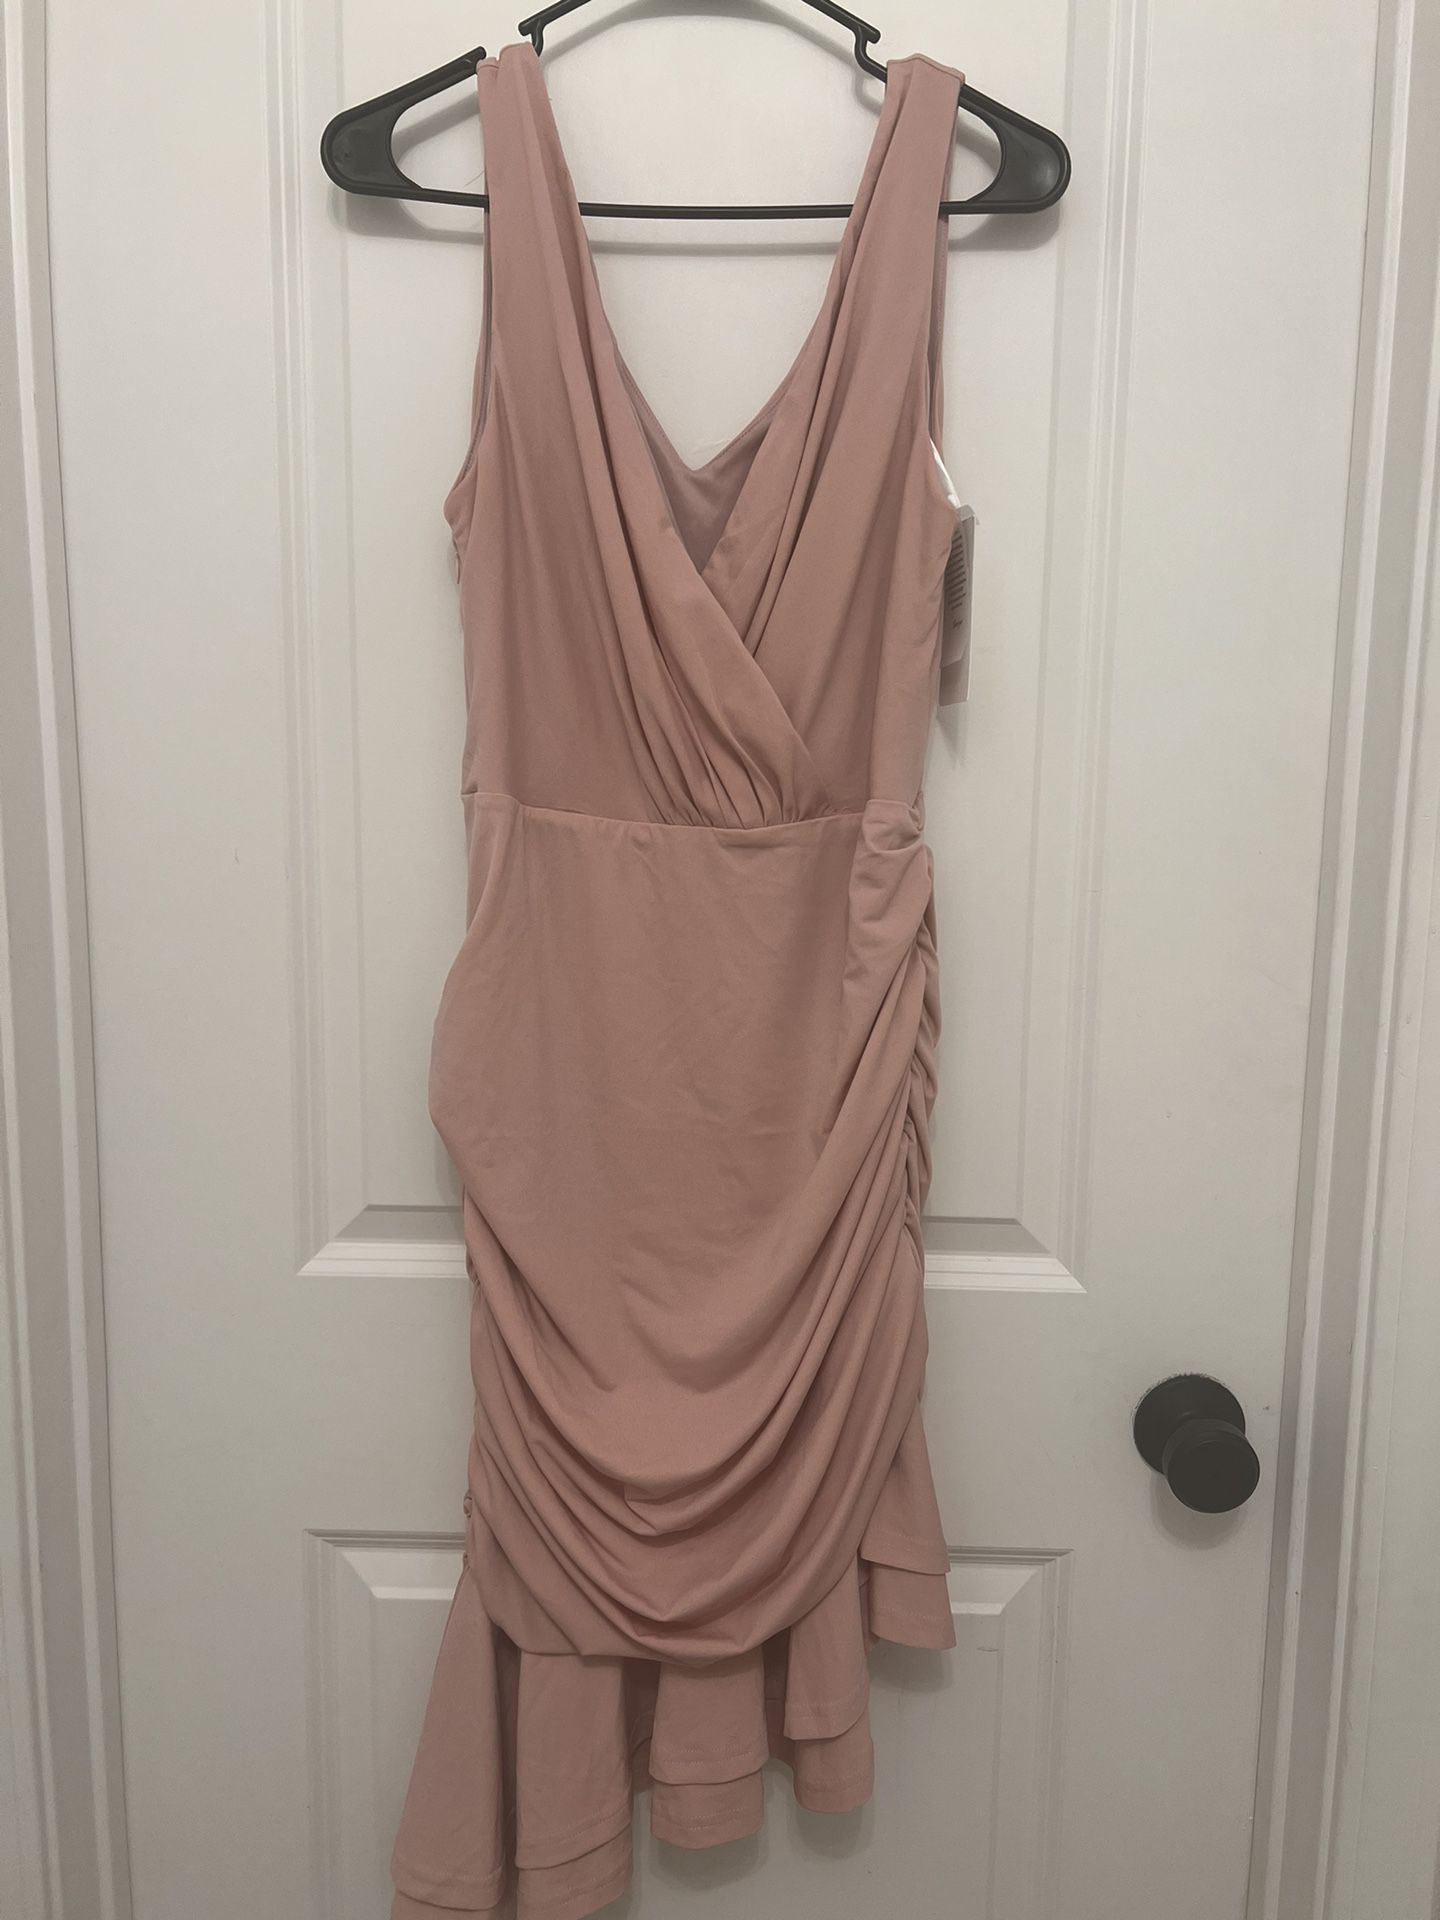 New Party Dress